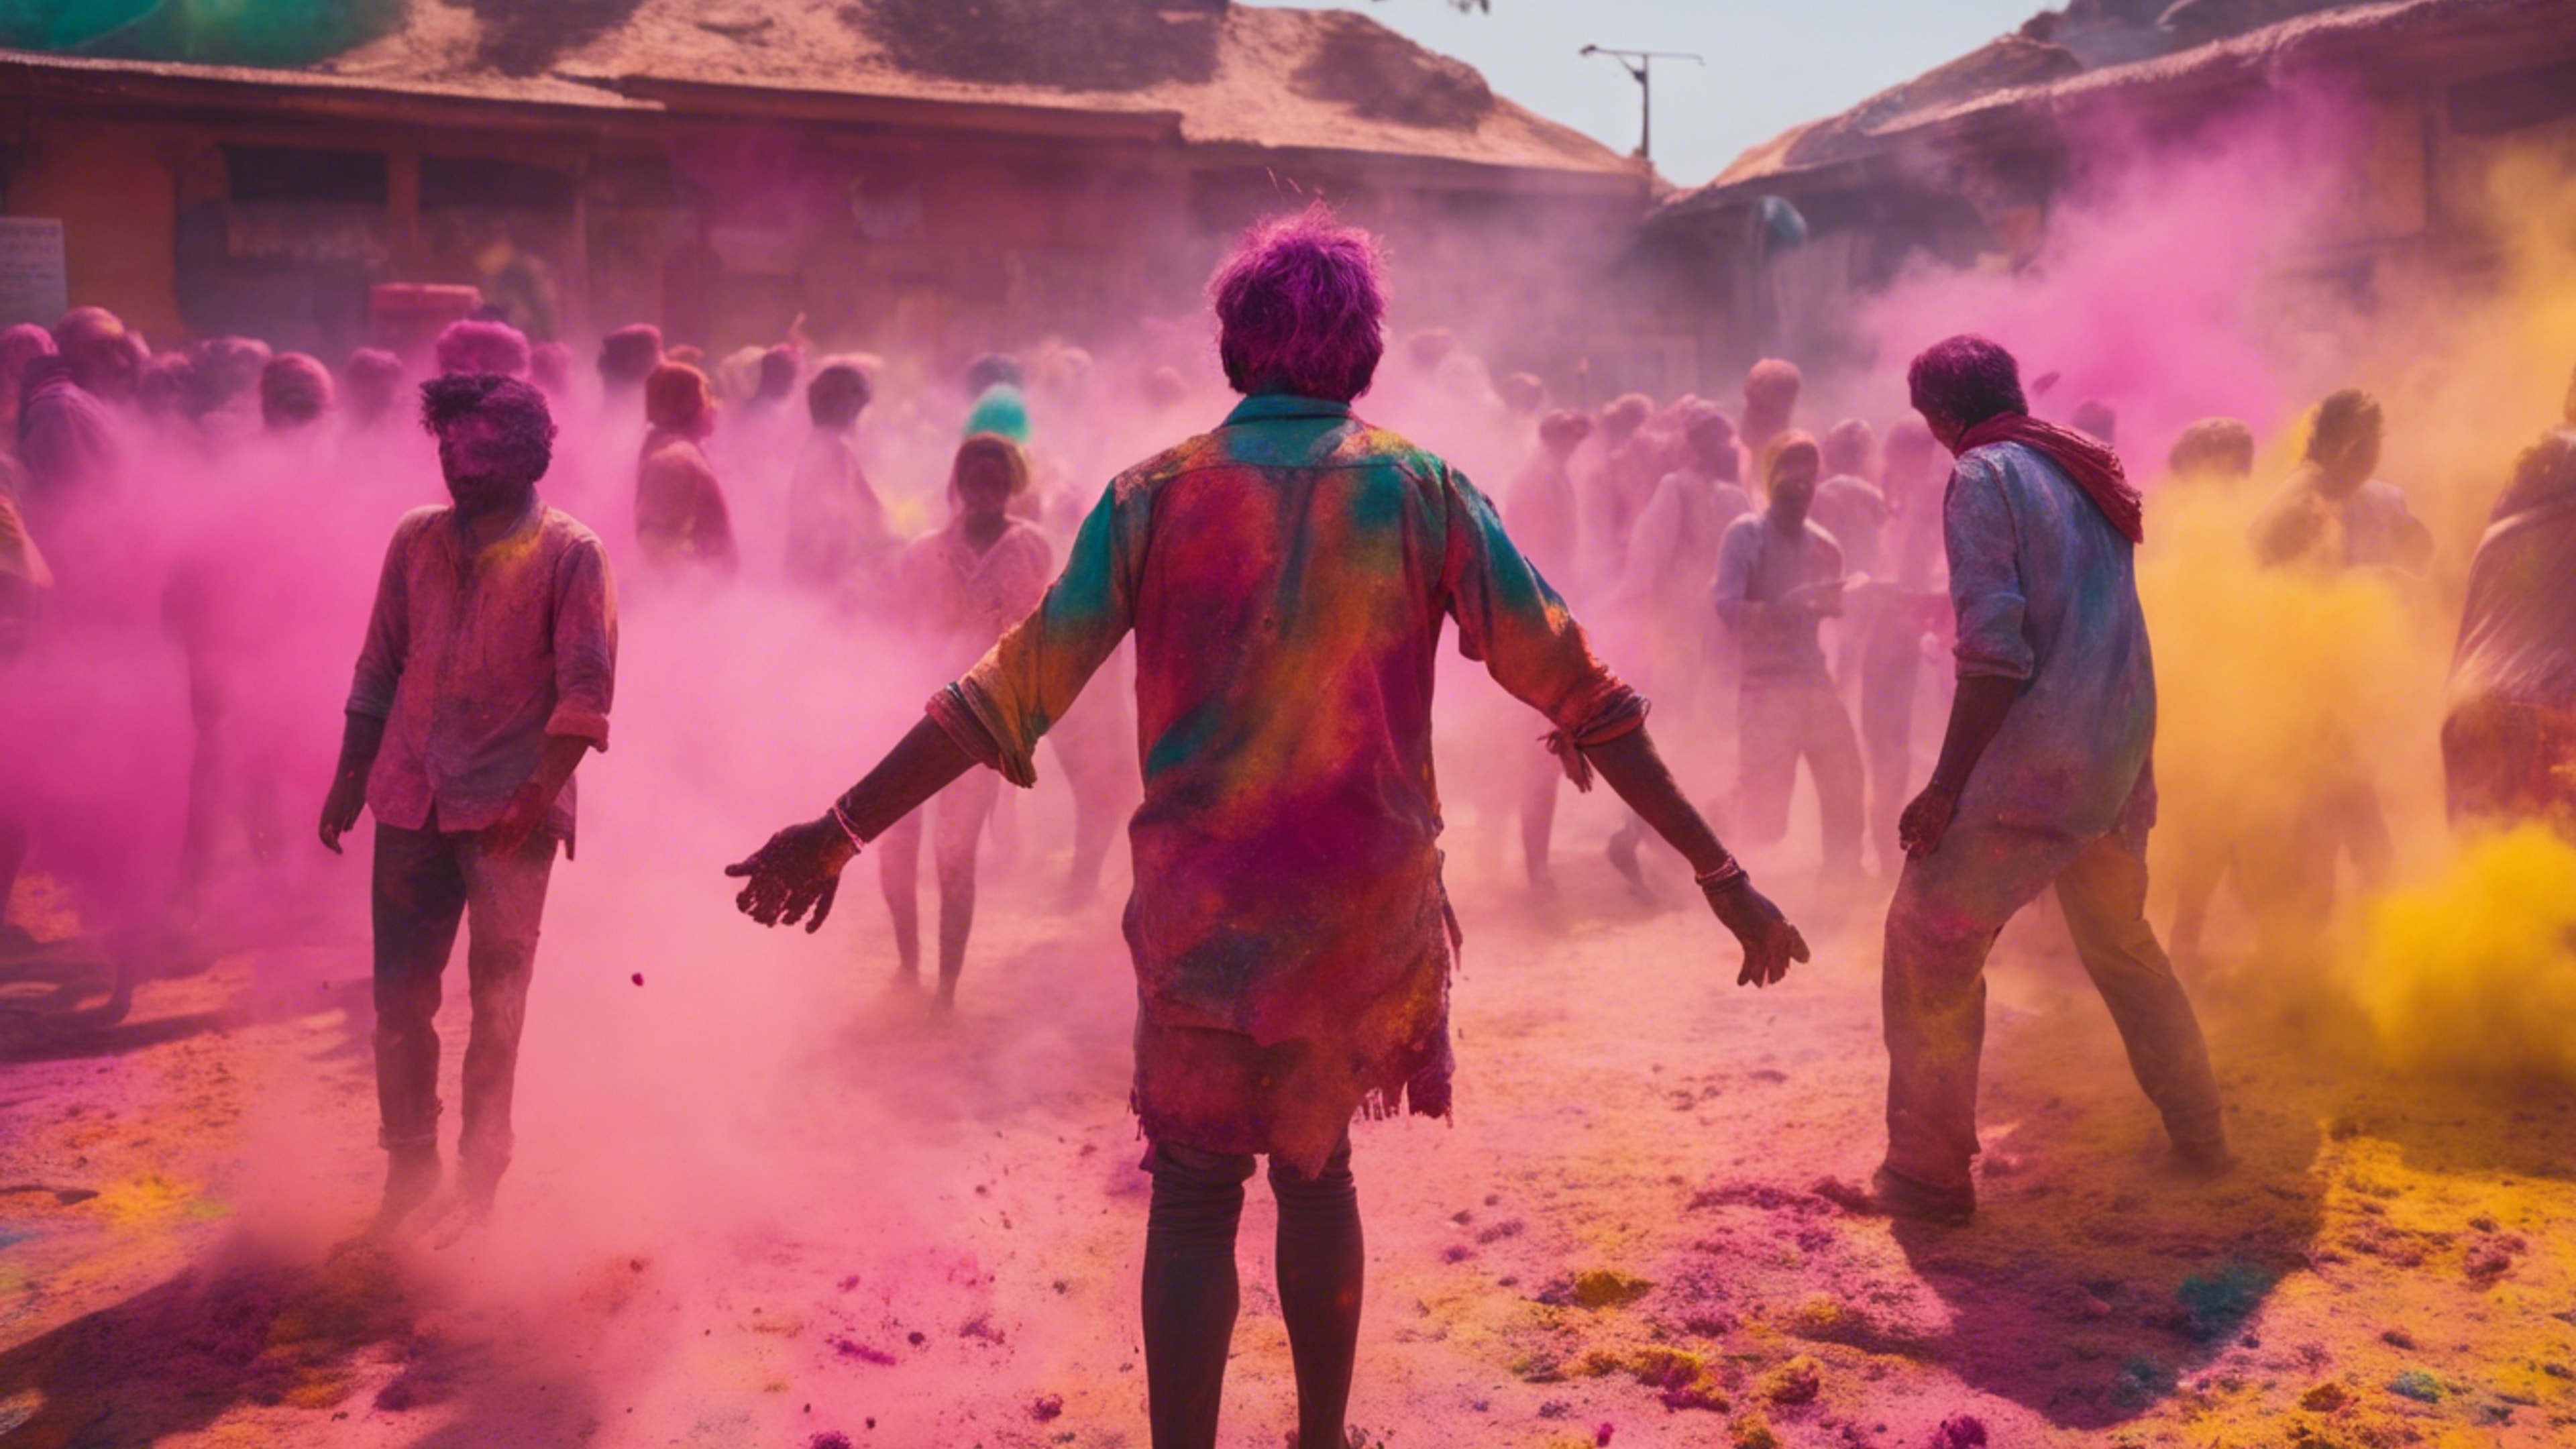 A vibrant and colorful Holi festival with people throwing powdered colors and laughing in the backdrop of an old Indian city. Обои[6dae05cbdf264a67bd16]